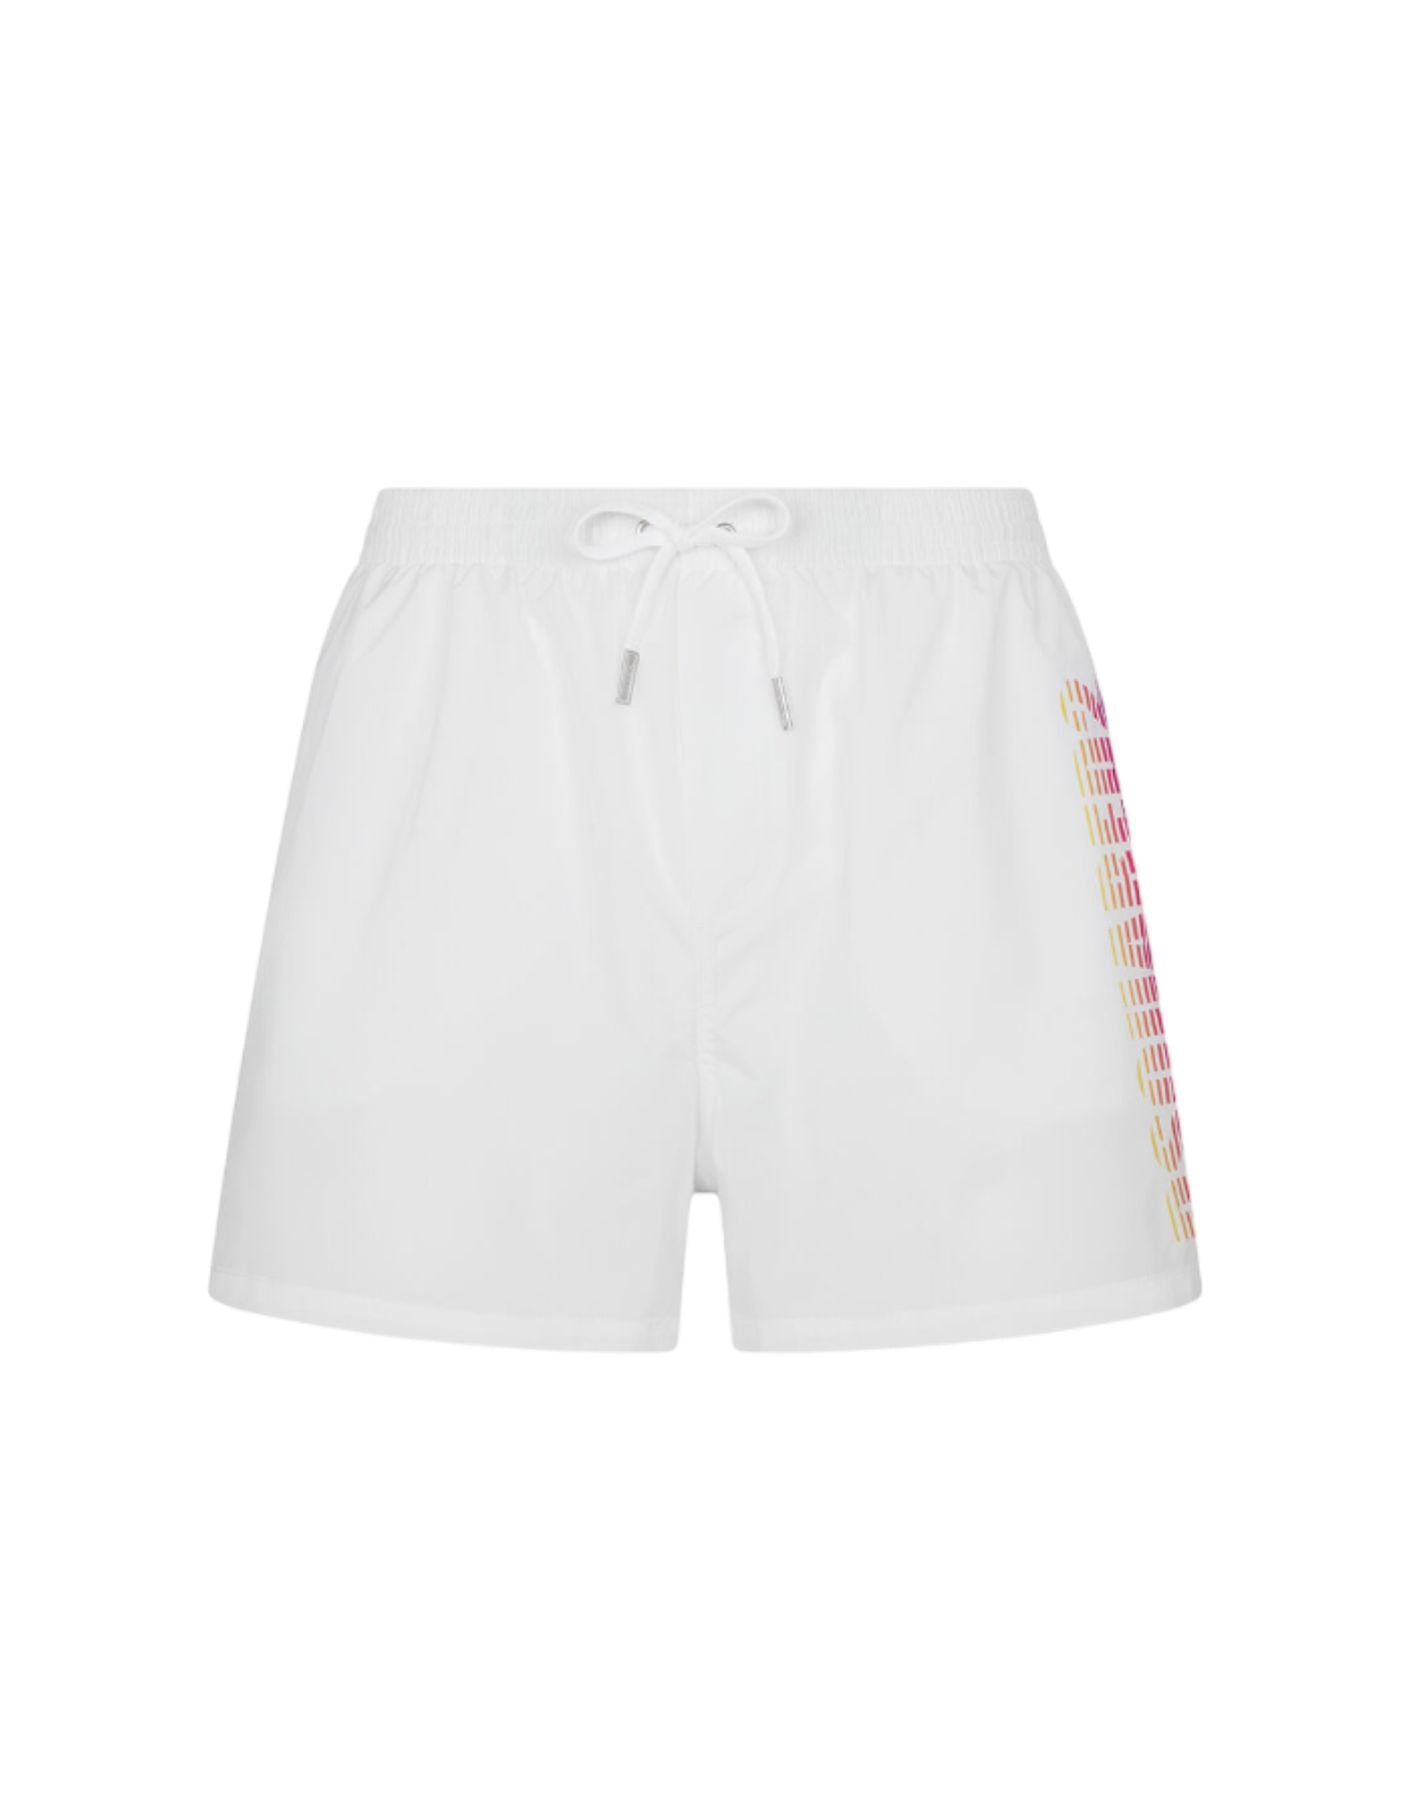 Swimsuit for man D7B645660 WHITE DSQUARED2